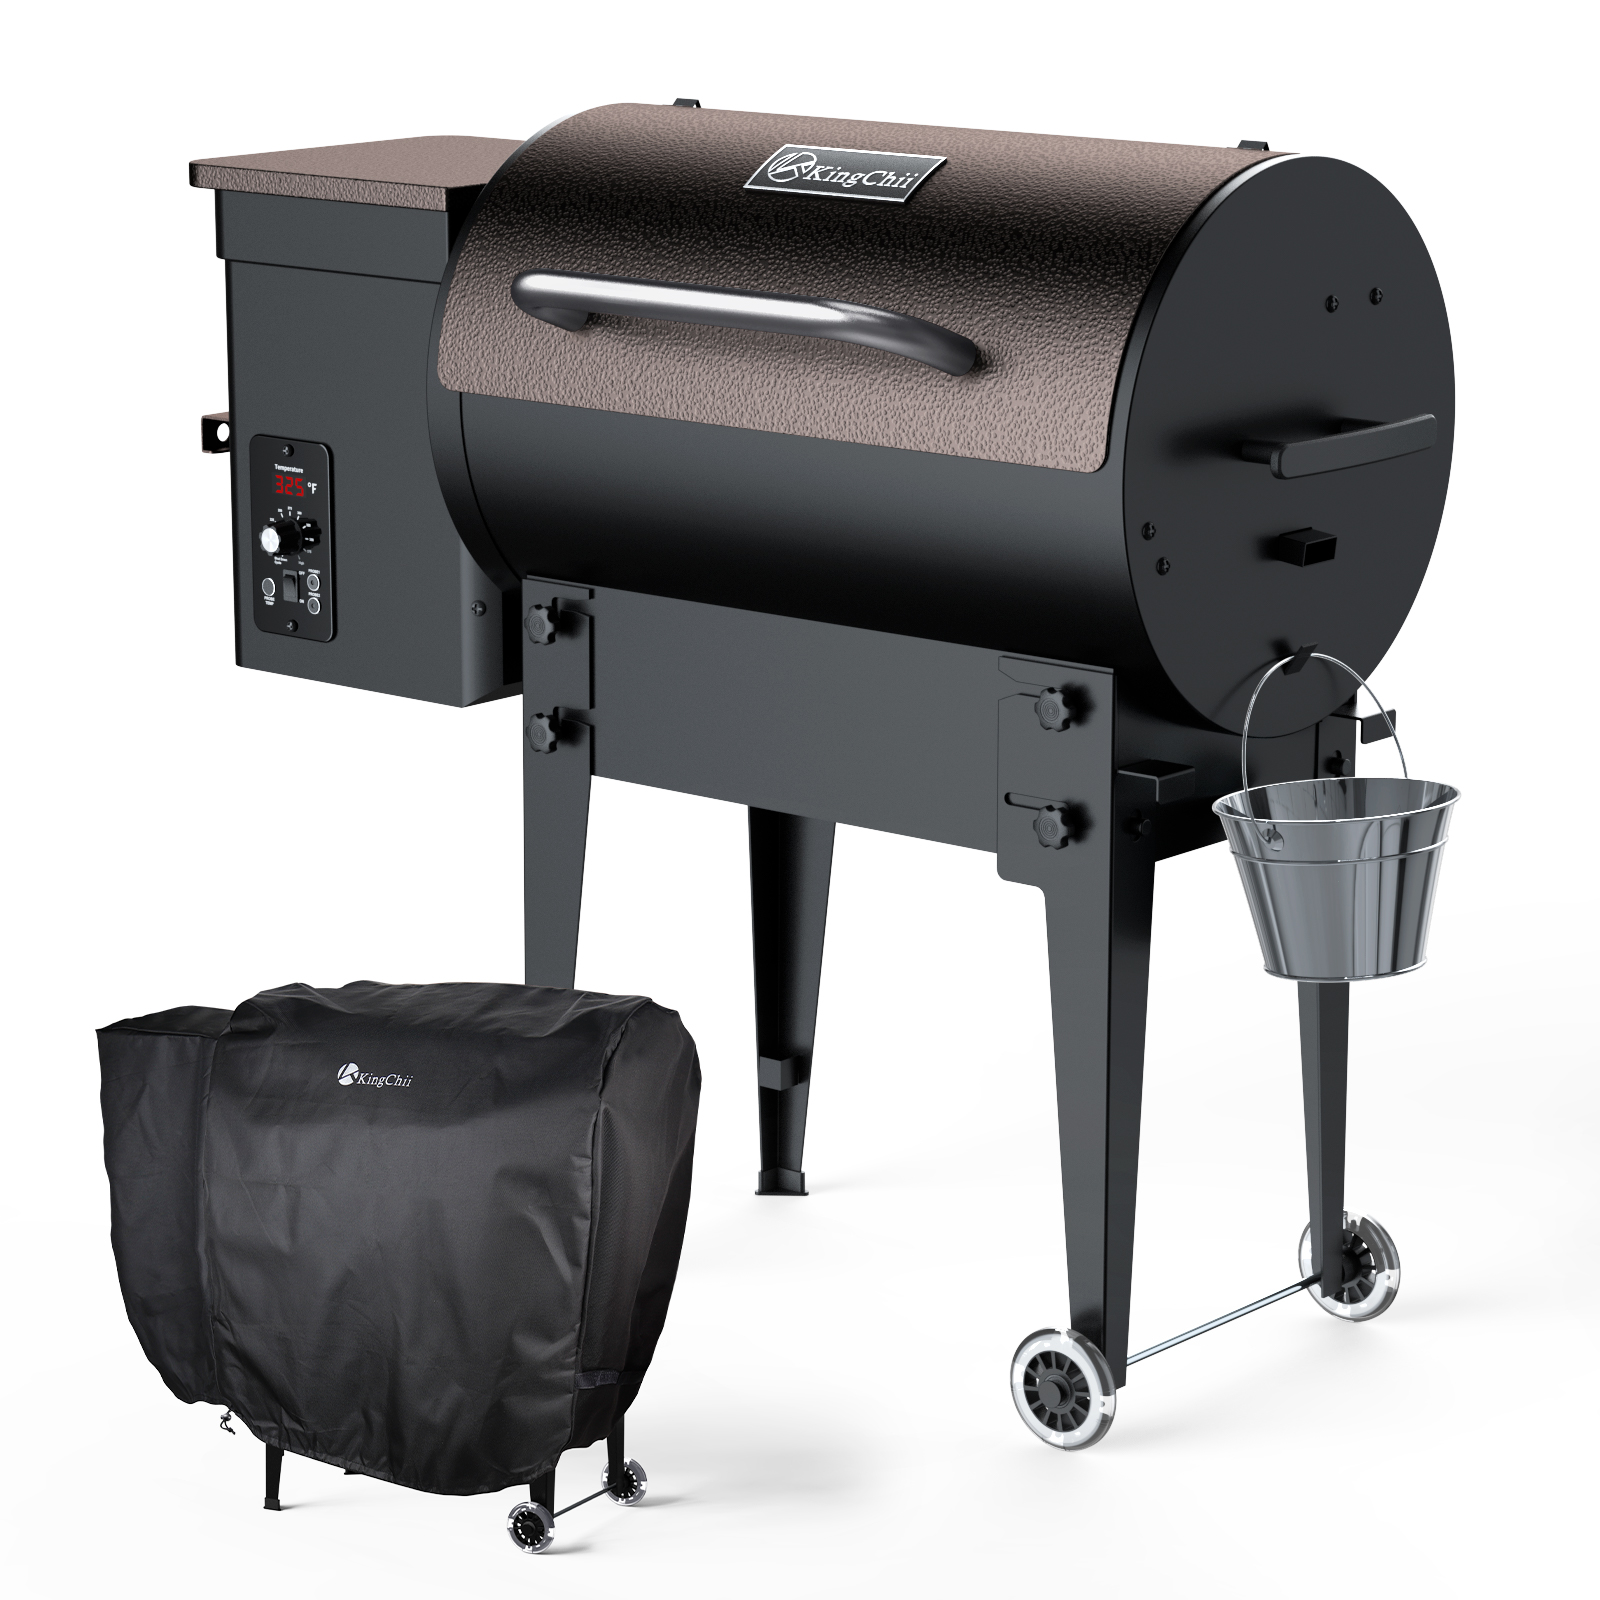 KingChii 456 sq. in Wood Pellet Smoker & Grill BBQ with Auto Temperature Controls $239